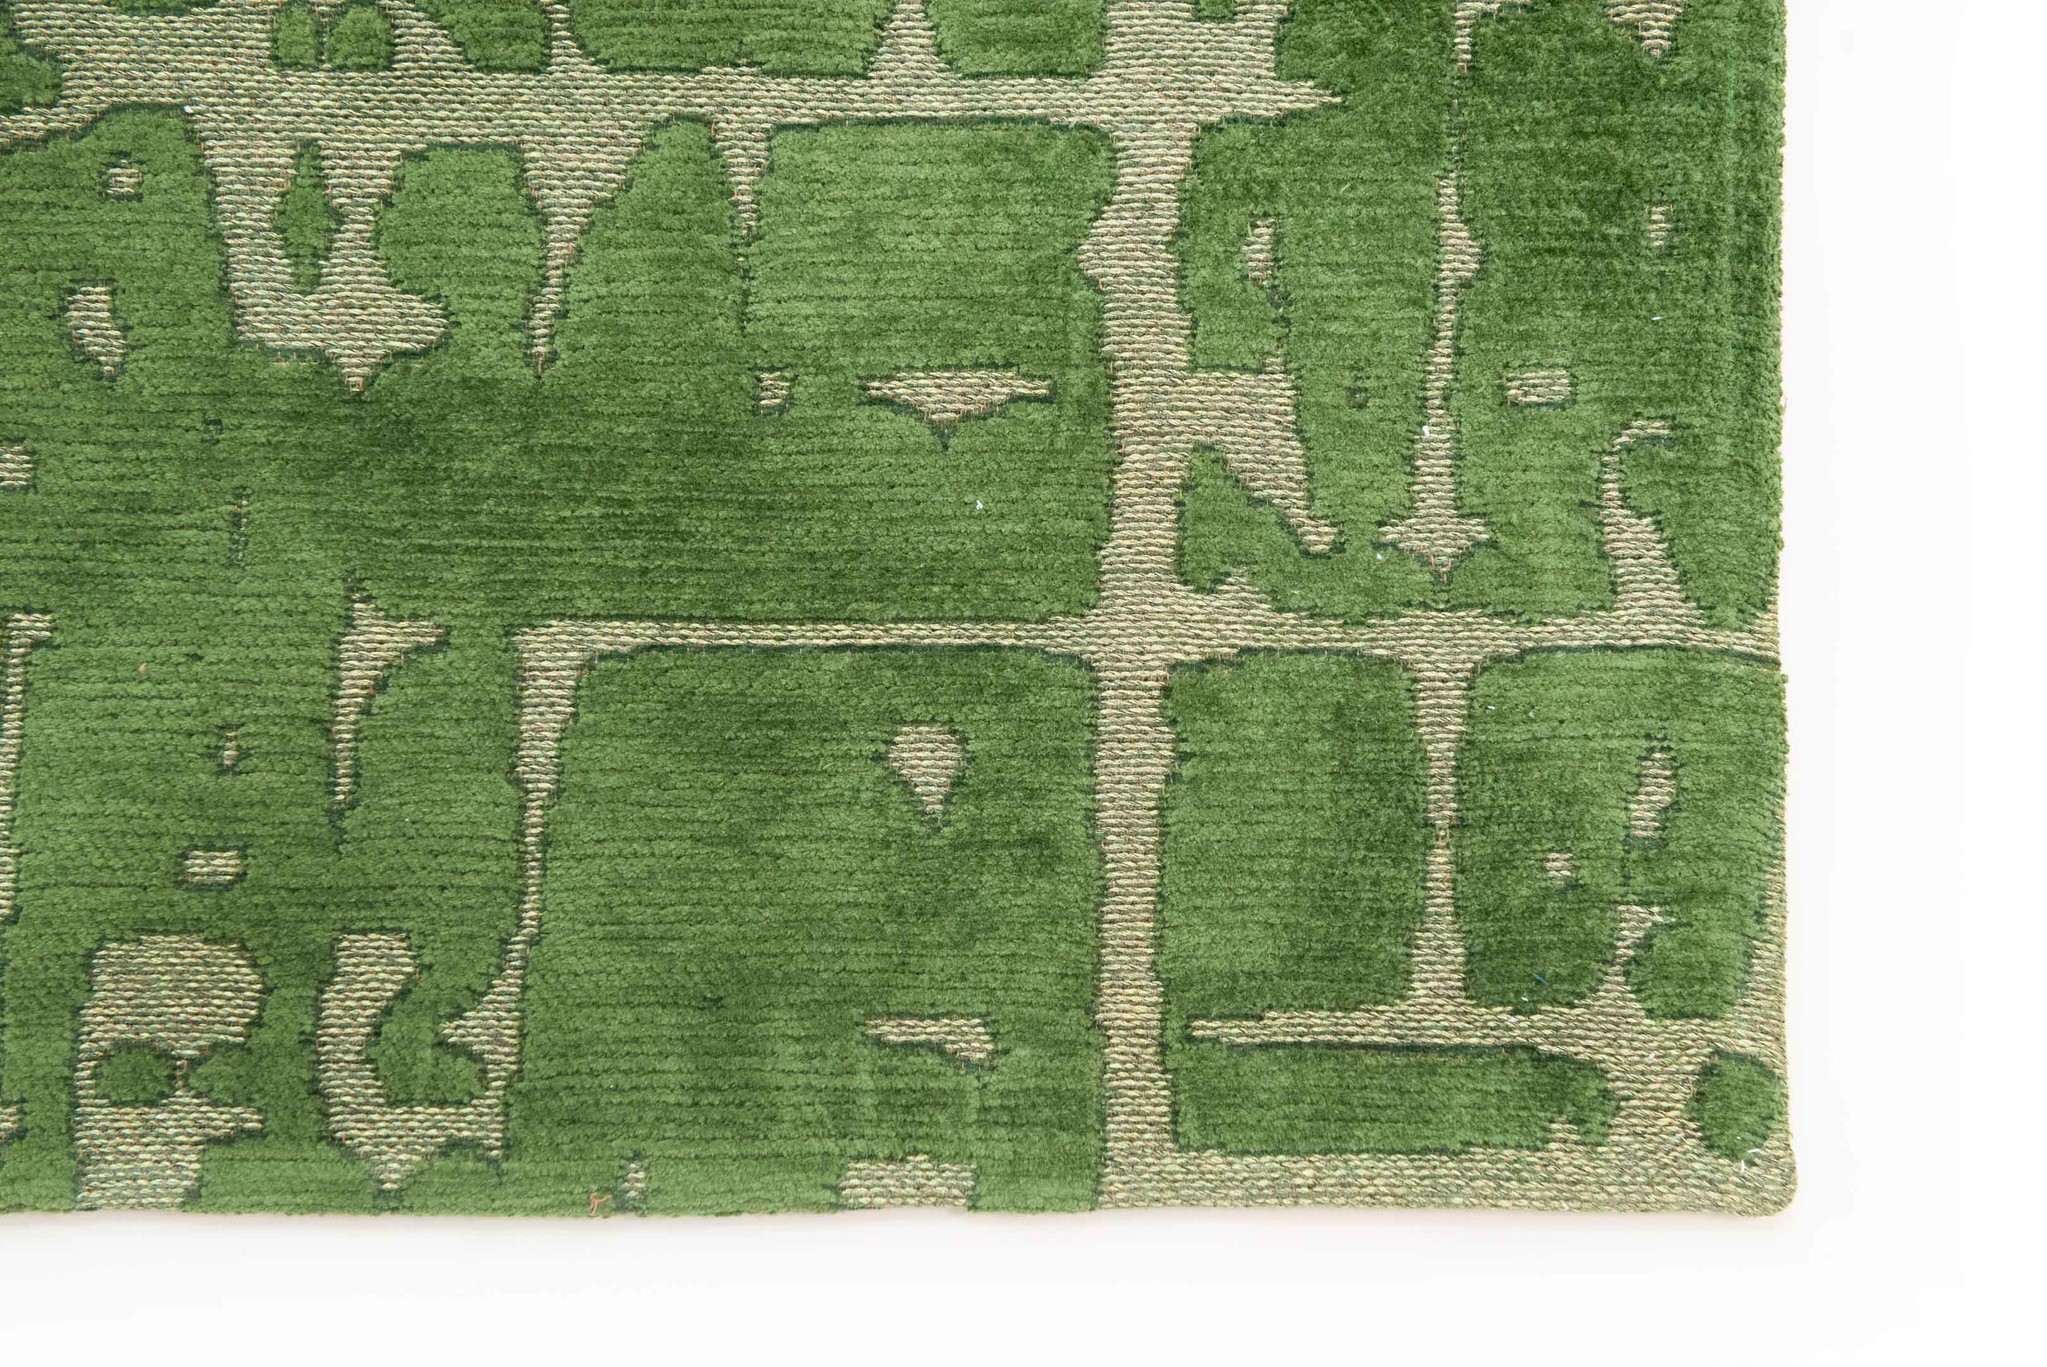 Abstract Green Belgian Rug ☞ Size: 8' x 11' 2" (240 x 340 cm)